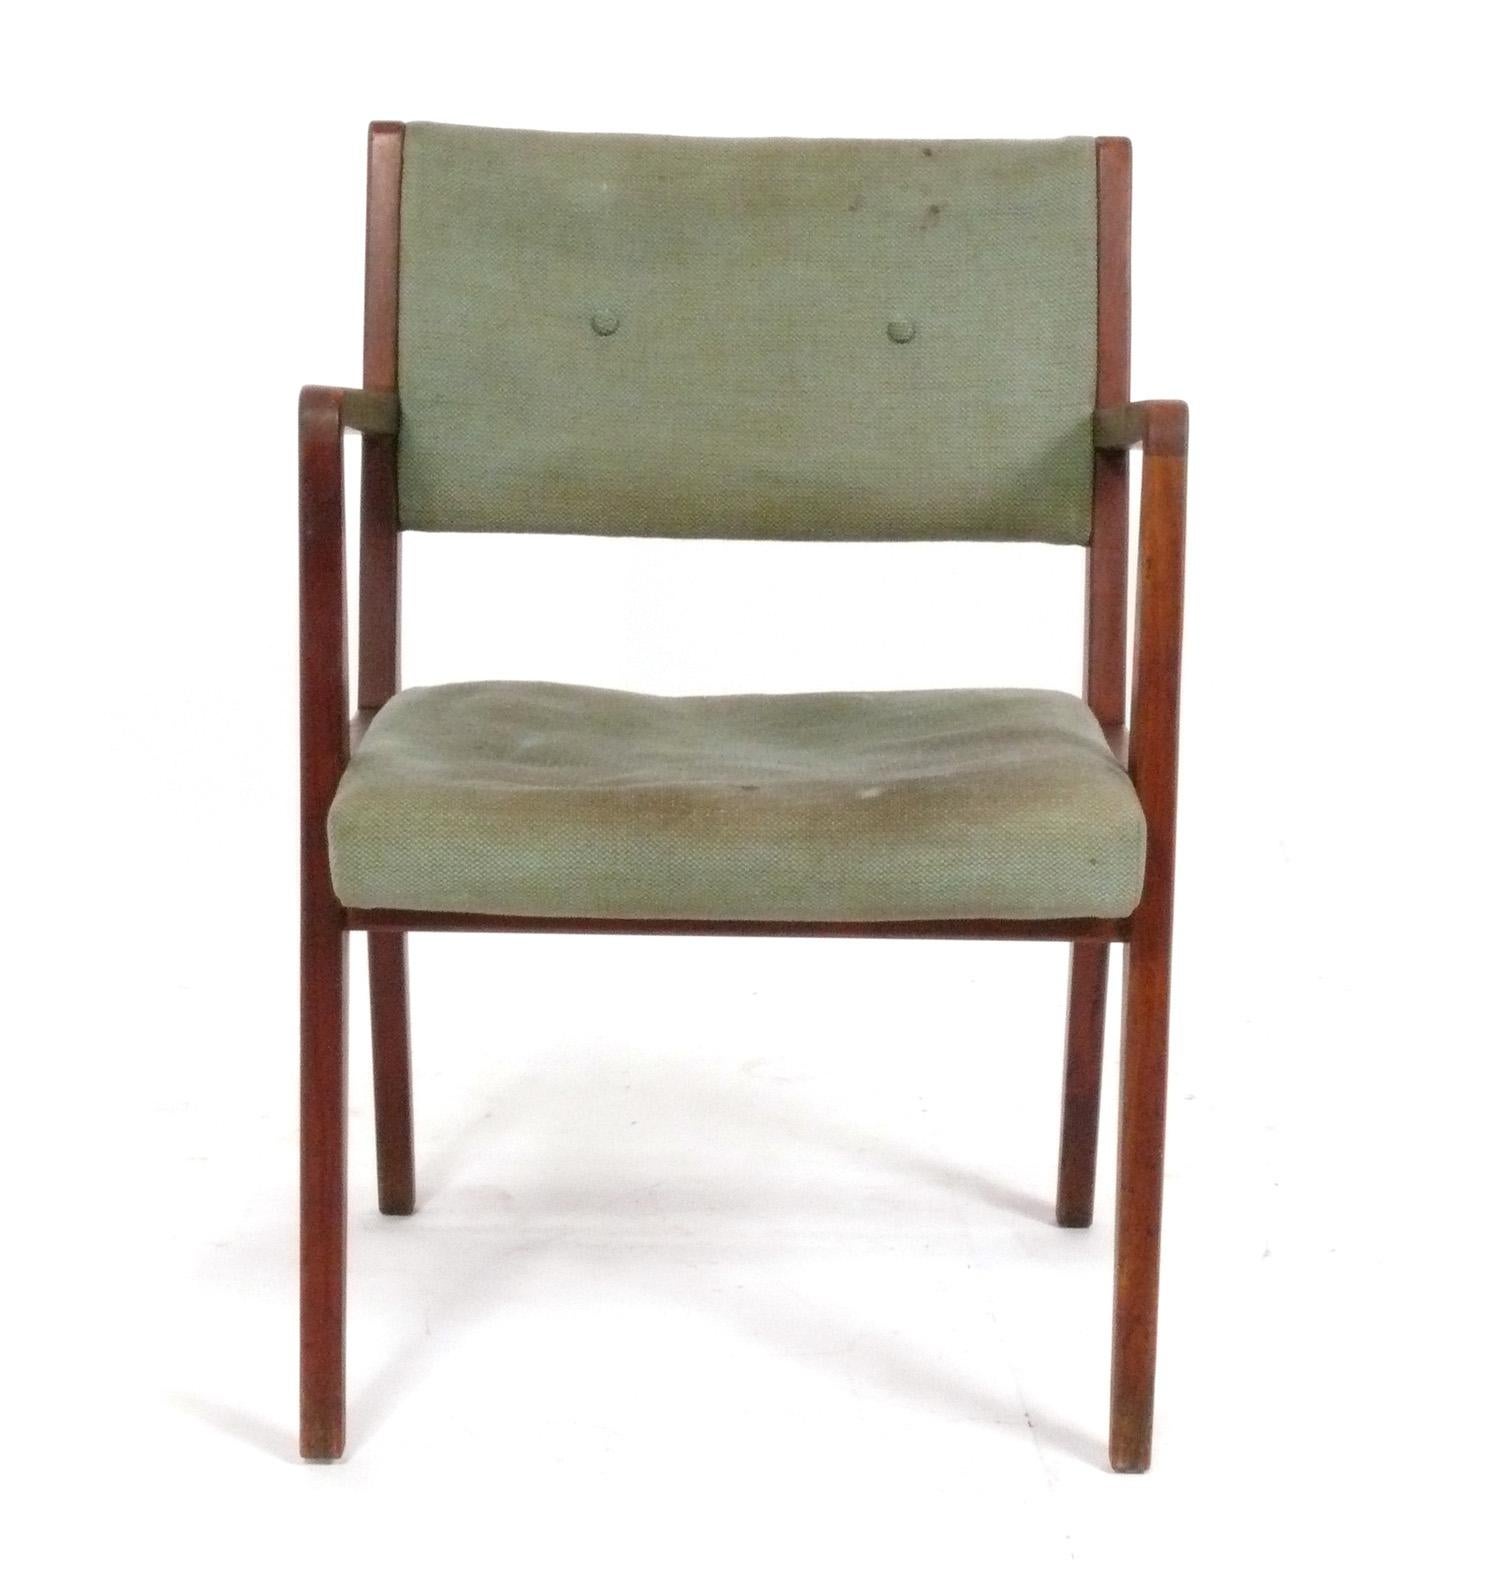 Pair of Clean Lined Mid Century Modern Armchairs, designed by Jens Risom, American, circa 1960s. These chairs are currently being reupholstered and can be completed in your fabric. Simply send us 4 yards of your fabric after purchase. The chairs are